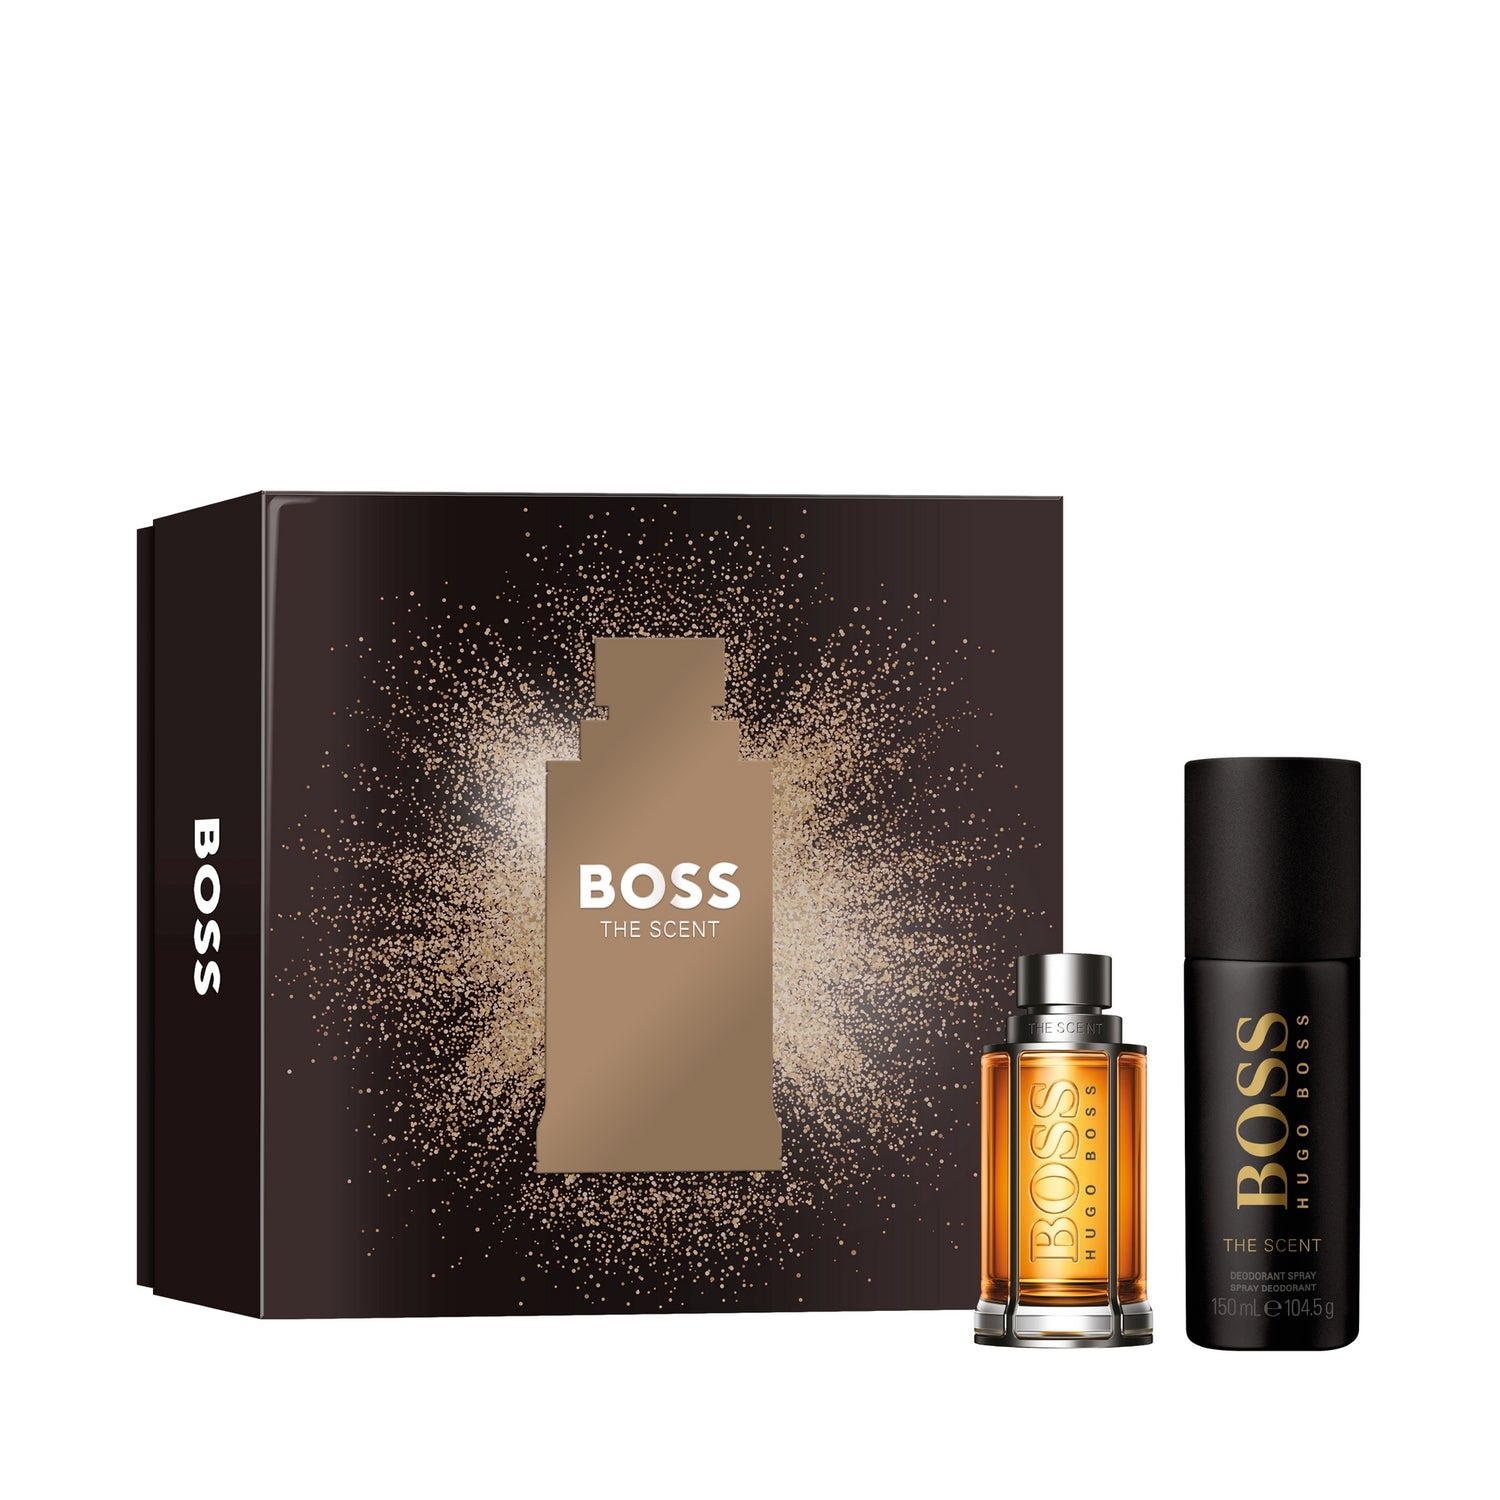 HUGO BOSS THE SCENT FOR HIM EDT 50ML 2 PIECE SET 